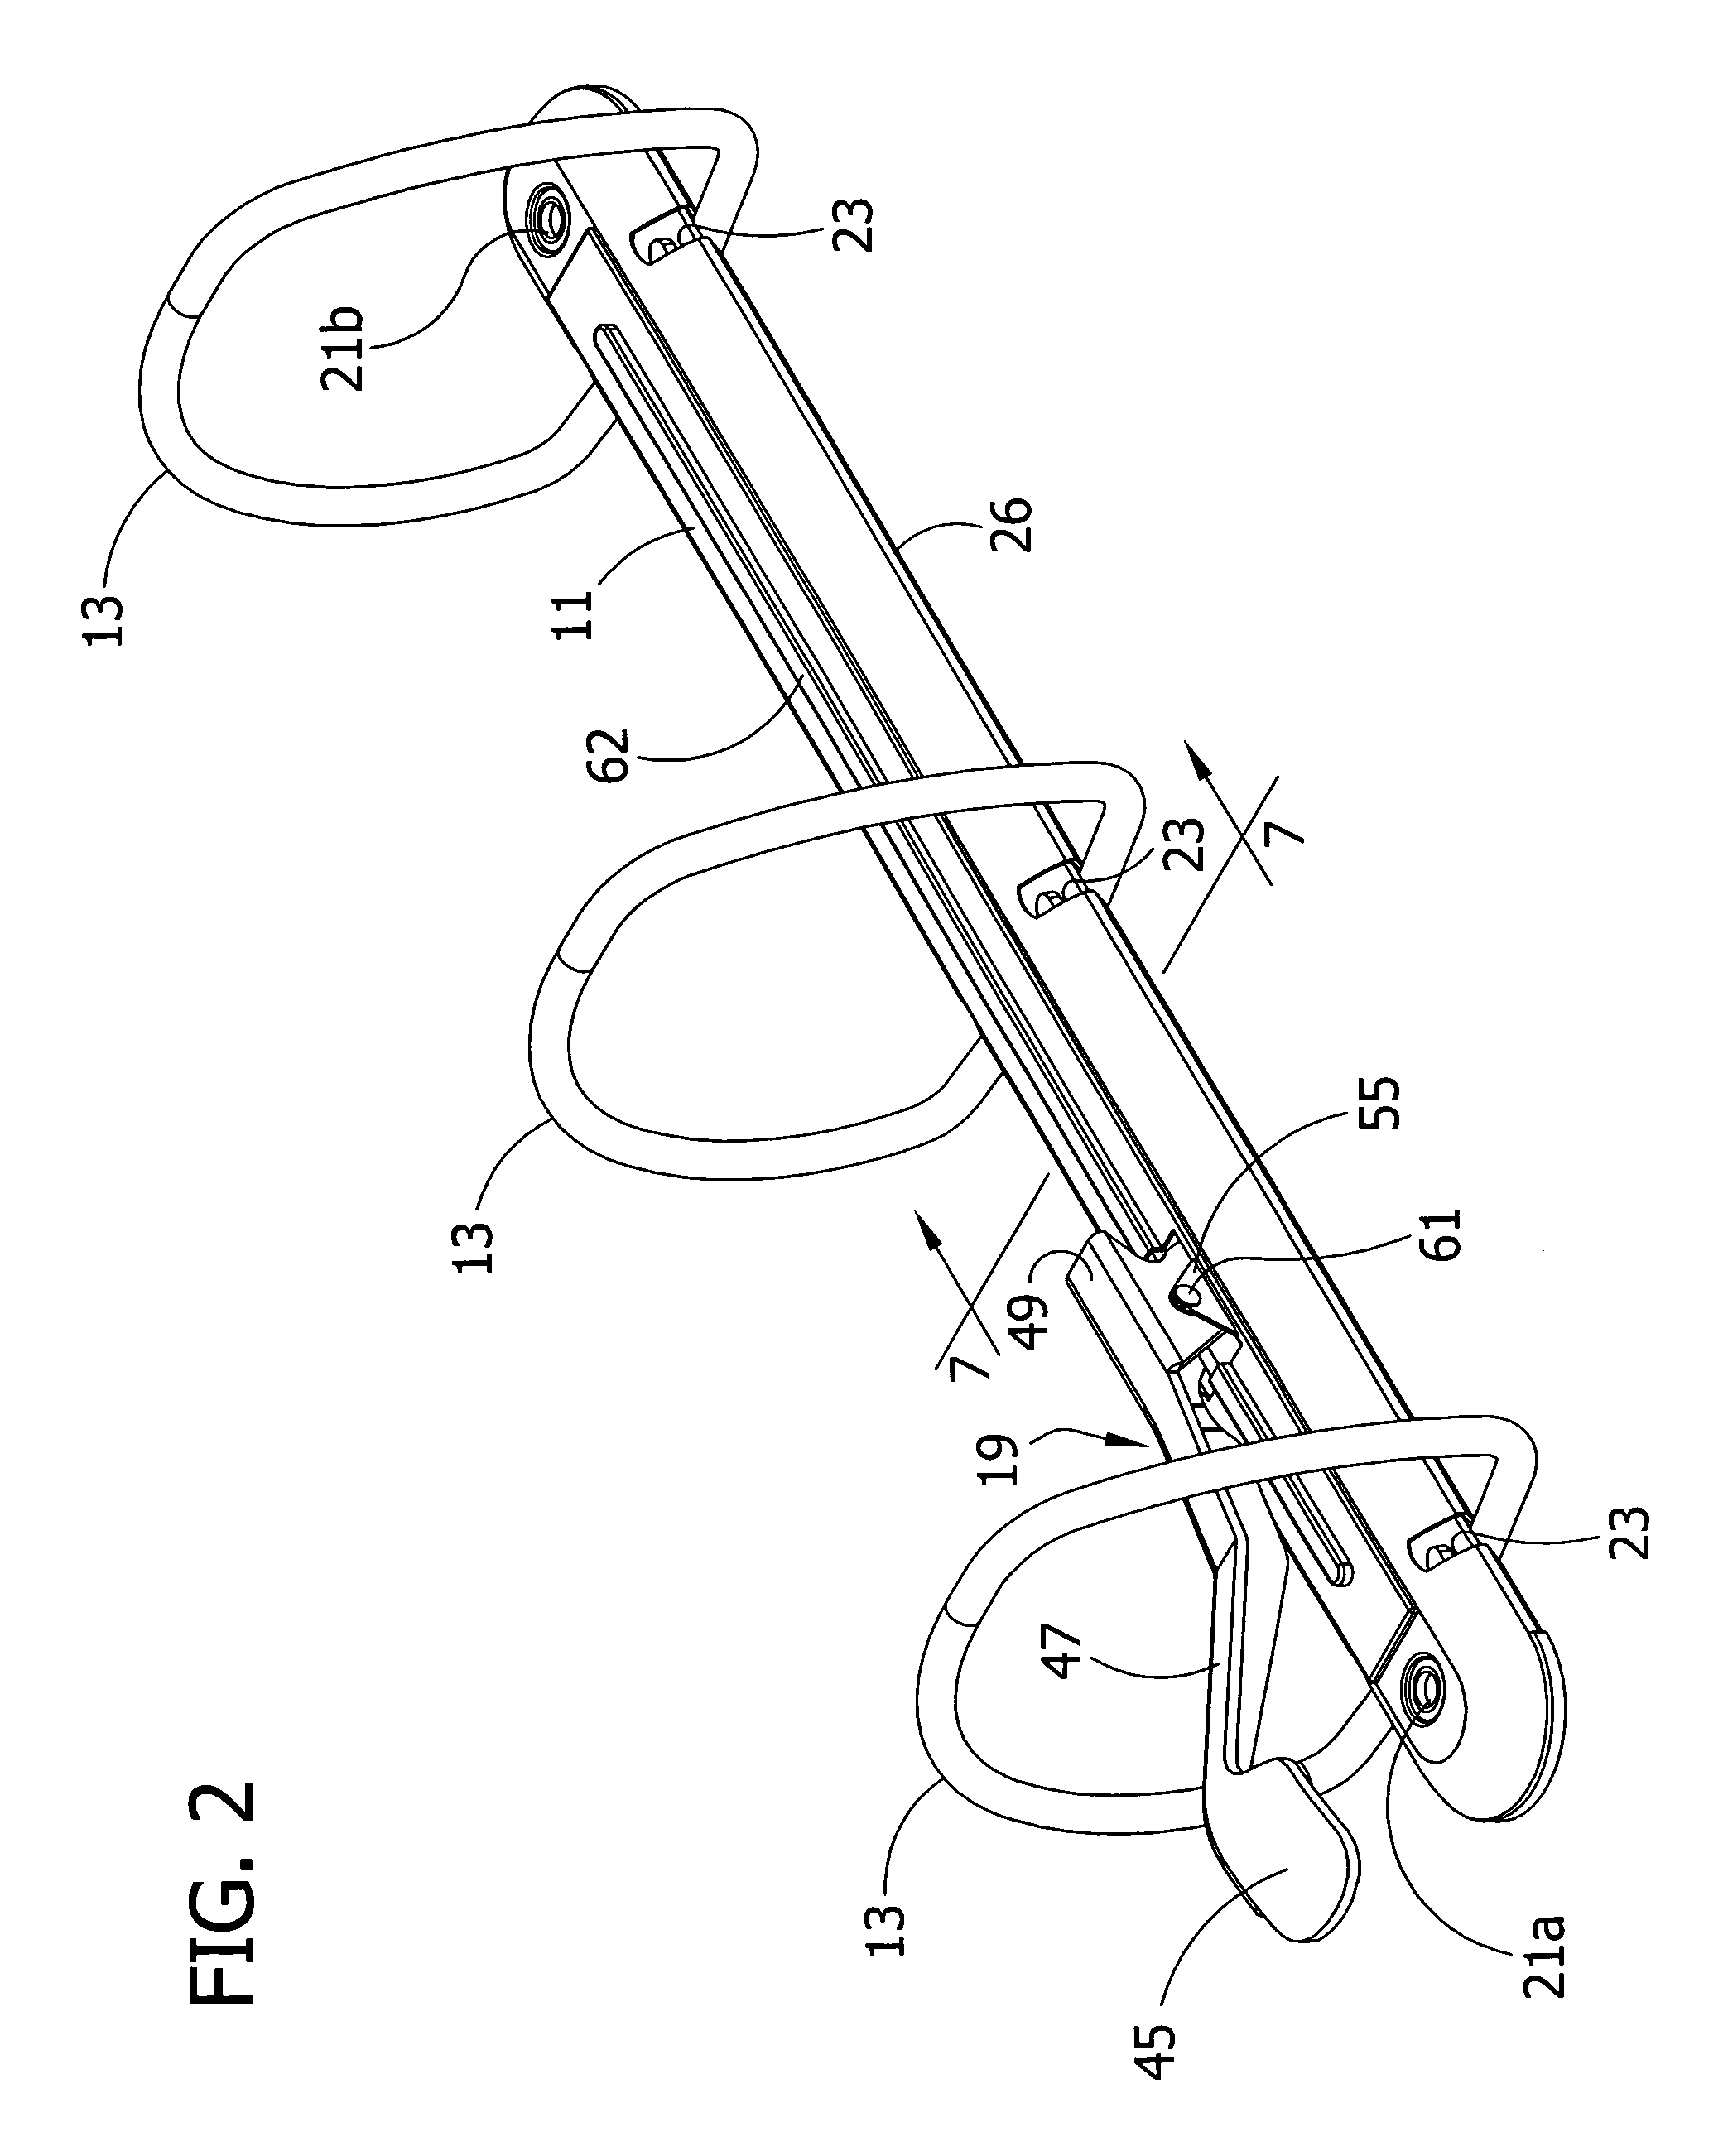 Ring binder mechanism with operating lever and travel bar